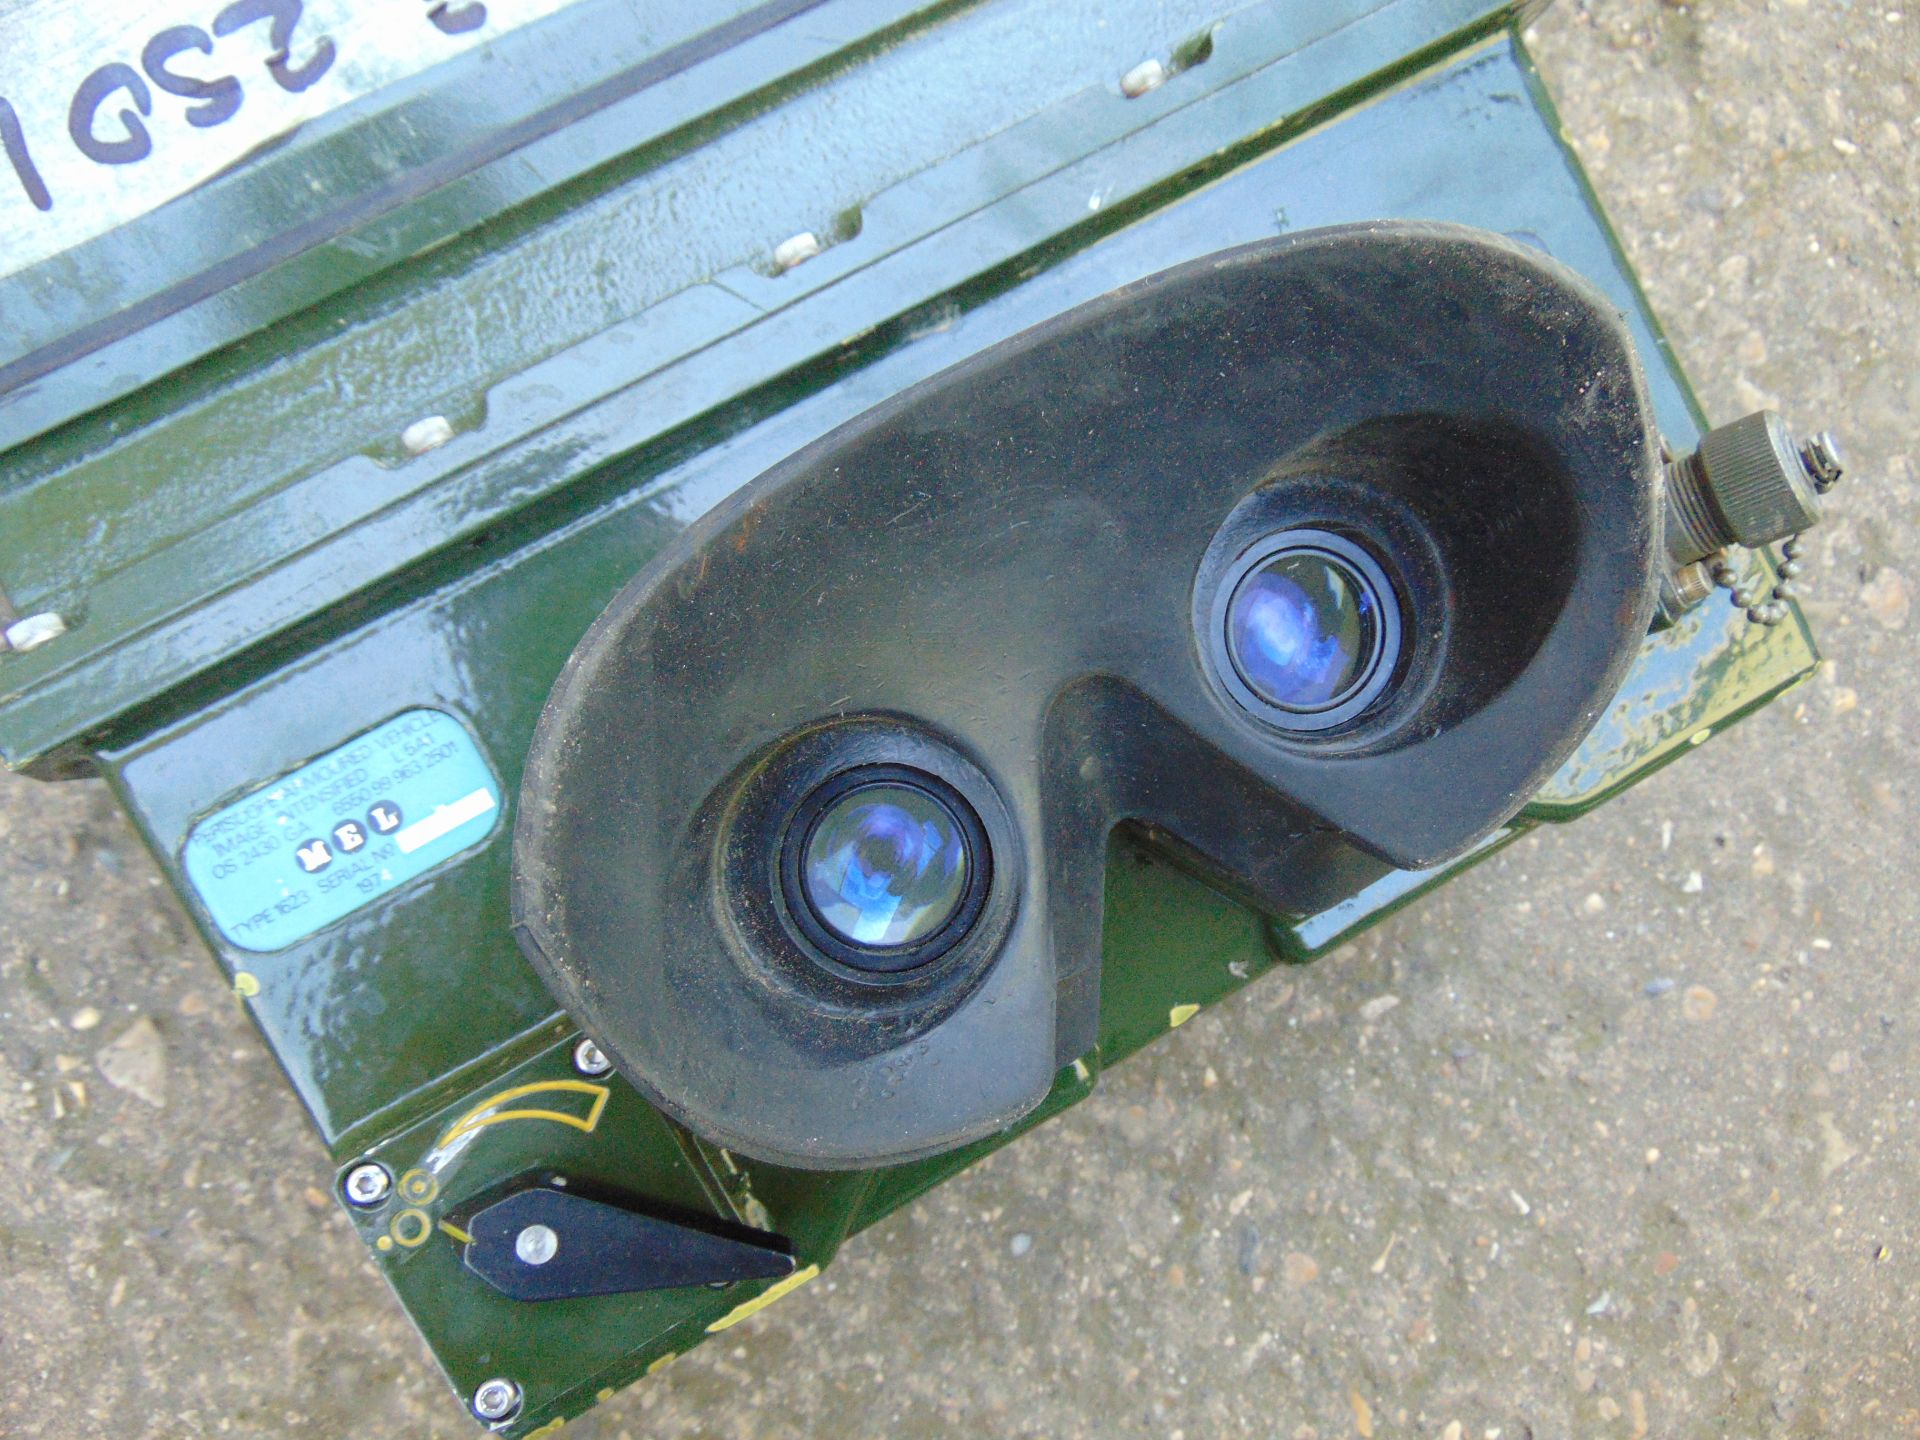 FV430 L5A1 Image Intensified Night Vision Periscope - Image 5 of 6